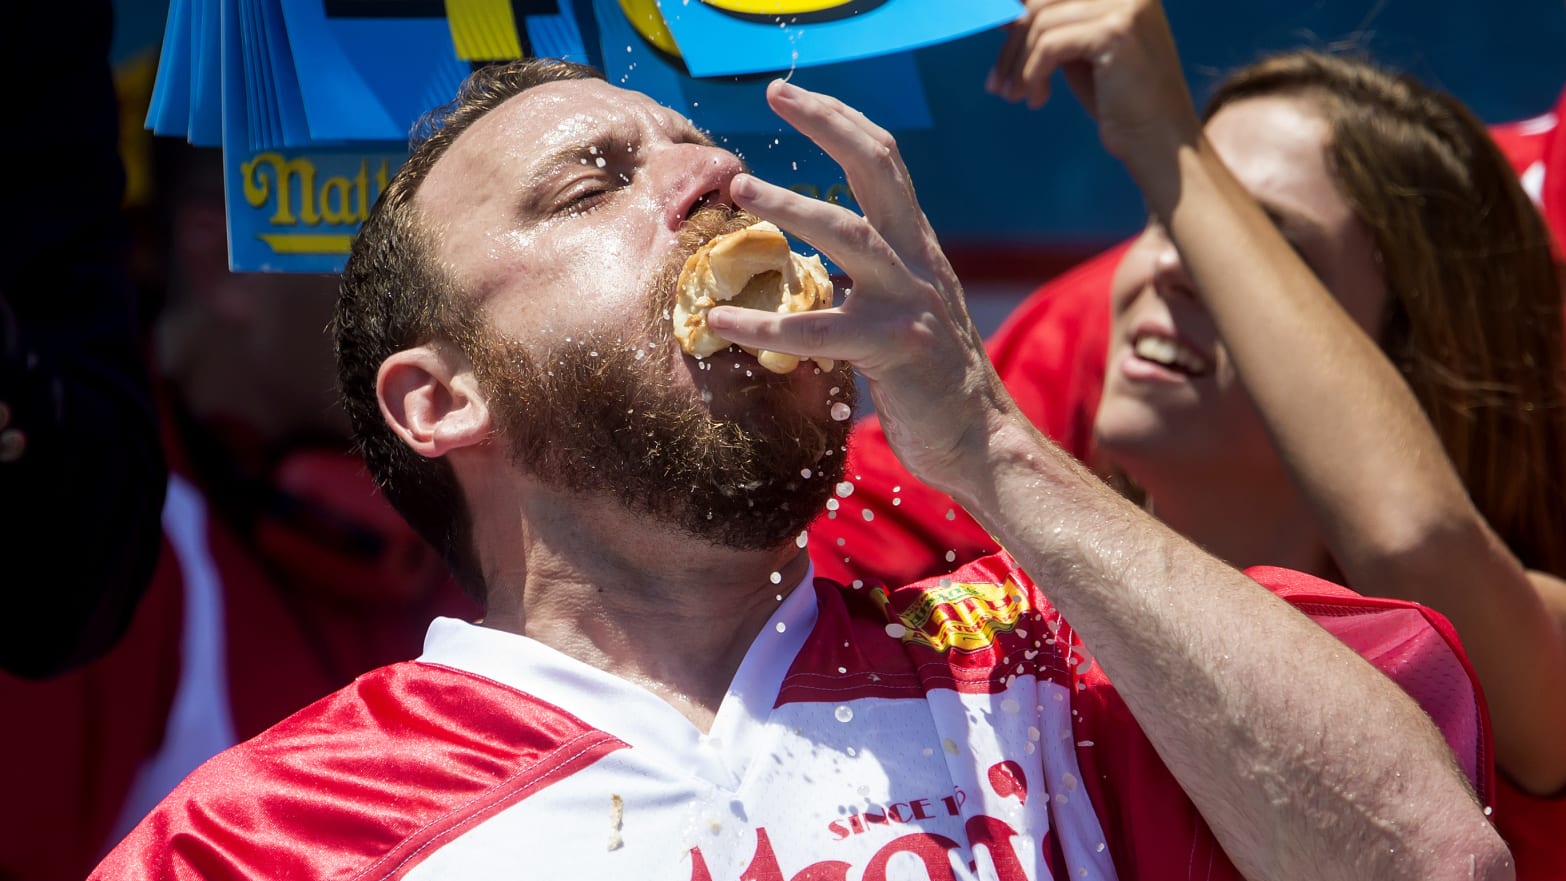 Joey Chestnut competes in the annual Hot Dog Eating Contest at Coney Island